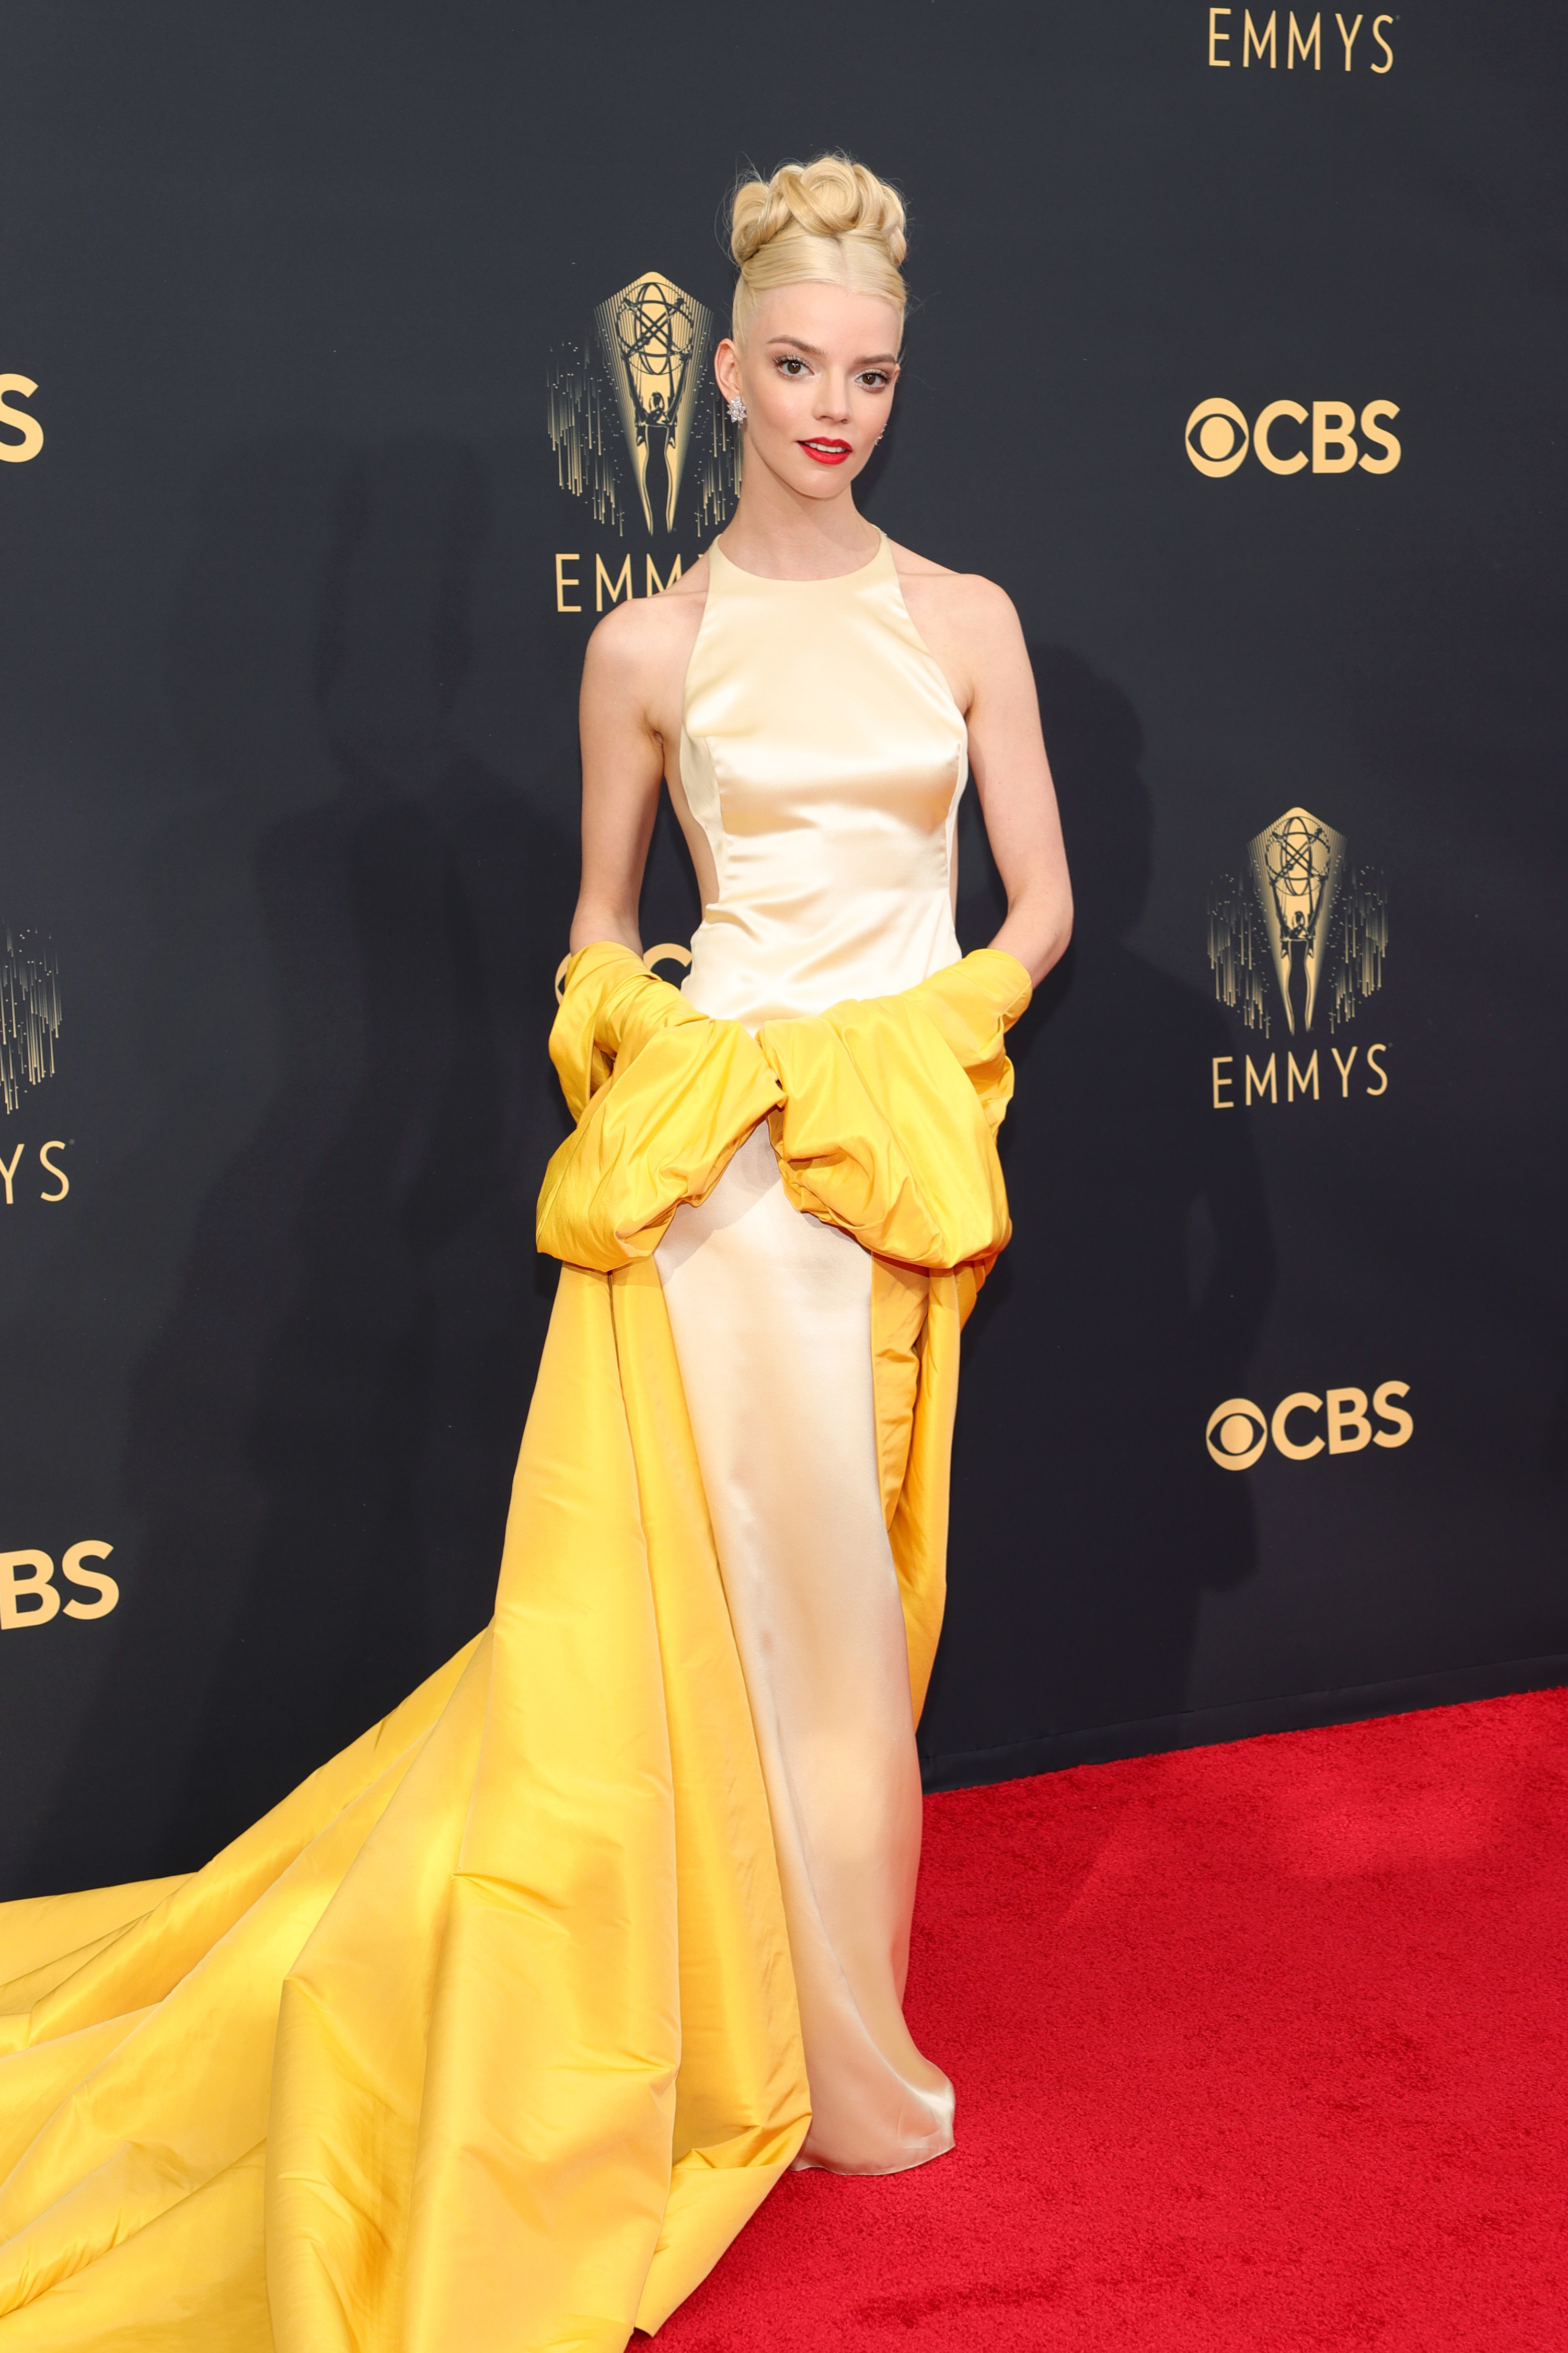 A full length shot of Anya wearing a gown to the Emmys